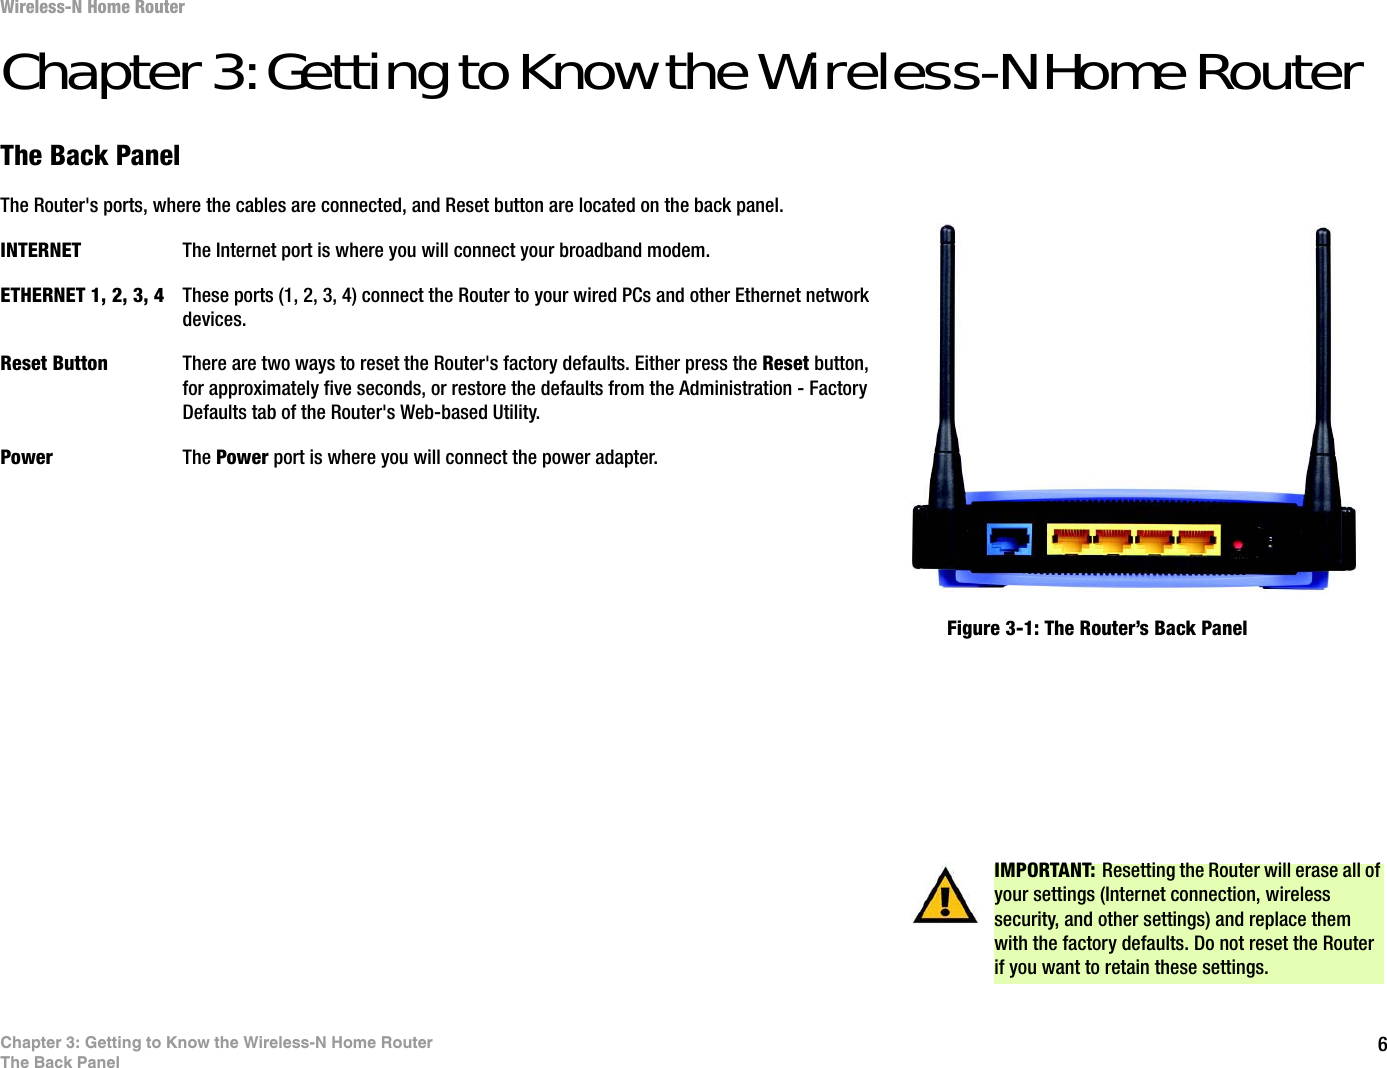 6Chapter 3: Getting to Know the Wireless-N Home RouterThe Back PanelWireless-N Home RouterChapter 3: Getting to Know the Wireless-N Home RouterThe Back PanelThe Router&apos;s ports, where the cables are connected, and Reset button are located on the back panel.INTERNET The Internet port is where you will connect your broadband modem.ETHERNET 1, 2, 3, 4 These ports (1, 2, 3, 4) connect the Router to your wired PCs and other Ethernet network devices.Reset Button There are two ways to reset the Router&apos;s factory defaults. Either press the Reset button,for approximately five seconds, or restore the defaults from the Administration - Factory Defaults tab of the Router&apos;s Web-based Utility.Power The Power port is where you will connect the power adapter.IMPORTANT: Resetting the Router will erase all of your settings (Internet connection, wireless security, and other settings) and replace them with the factory defaults. Do not reset the Router if you want to retain these settings.Figure 3-1: The Router’s Back Panel